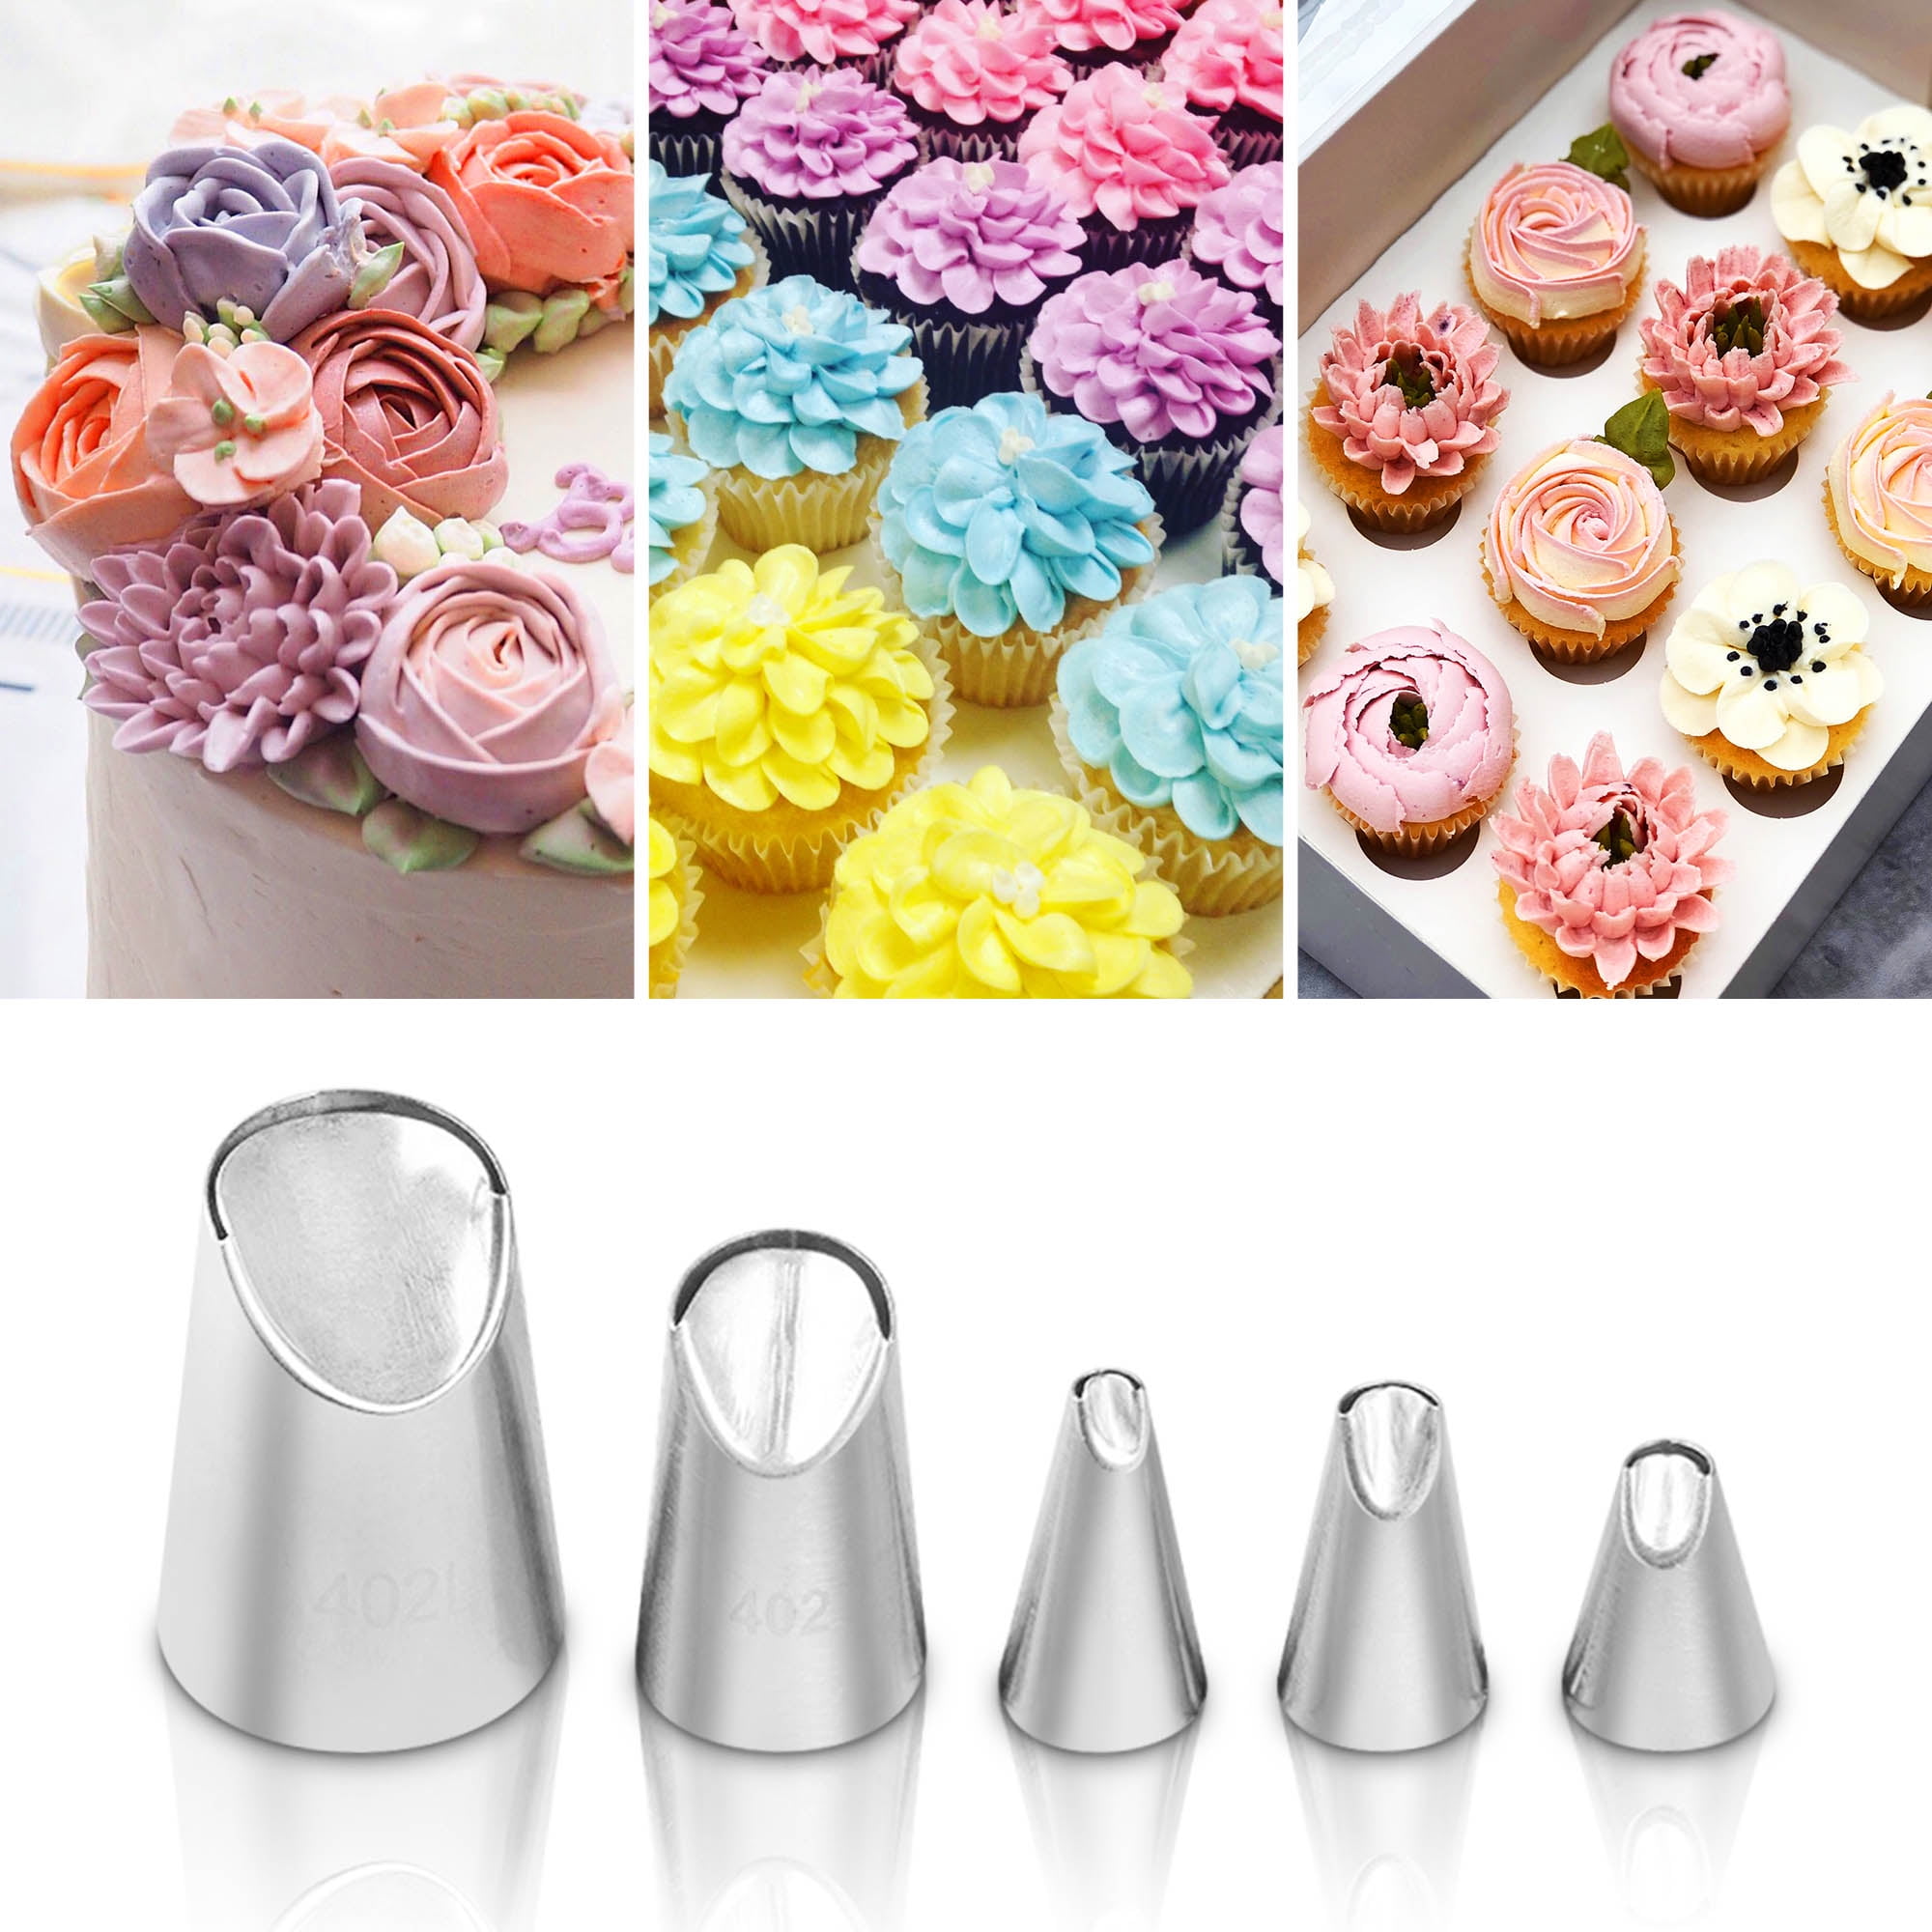 Cupcake Flower Icing Piping Nozzles Baking Mold Cake Decorating Ice Cream Tool 